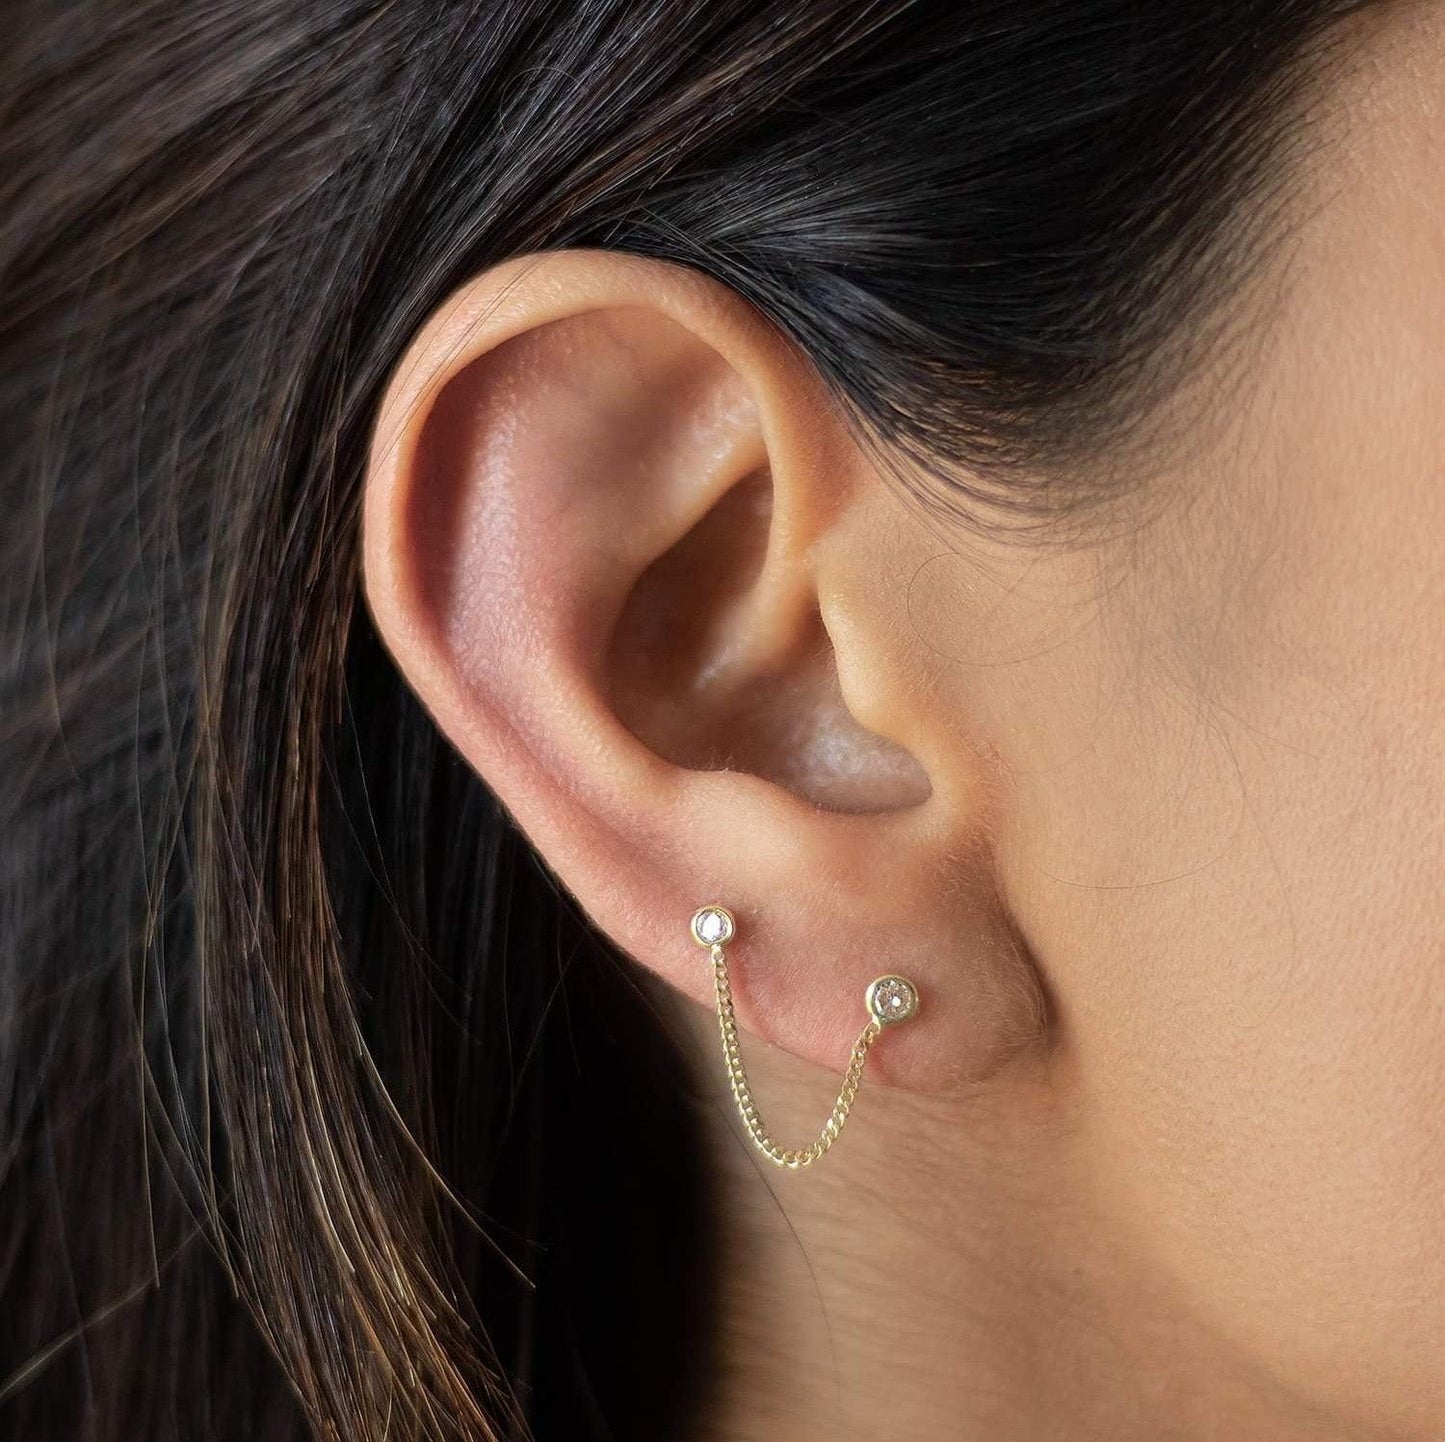 This beautiful earring will catch the attention of everyone in the room. It's made with a 10k gold chain and double circle pendant. This double piercing earring can be worn by women who have multiple piercing in their ears to add an extra decorative touch.